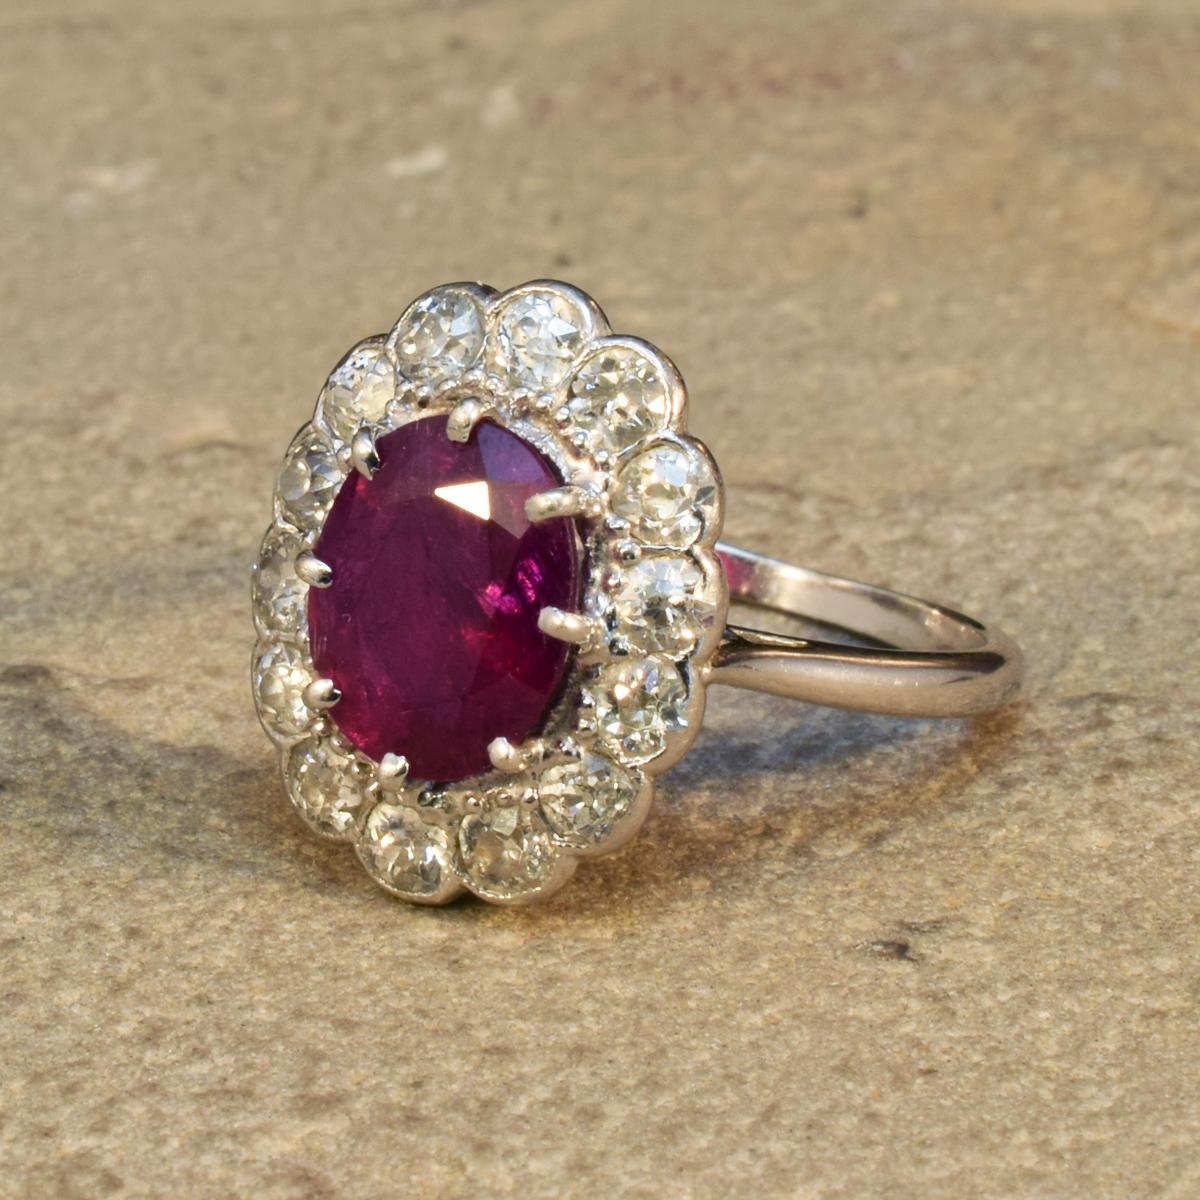 Women's or Men's Edwardian Ruby and Diamond Cluster Ring in 18 Carat White Gold and Platinum